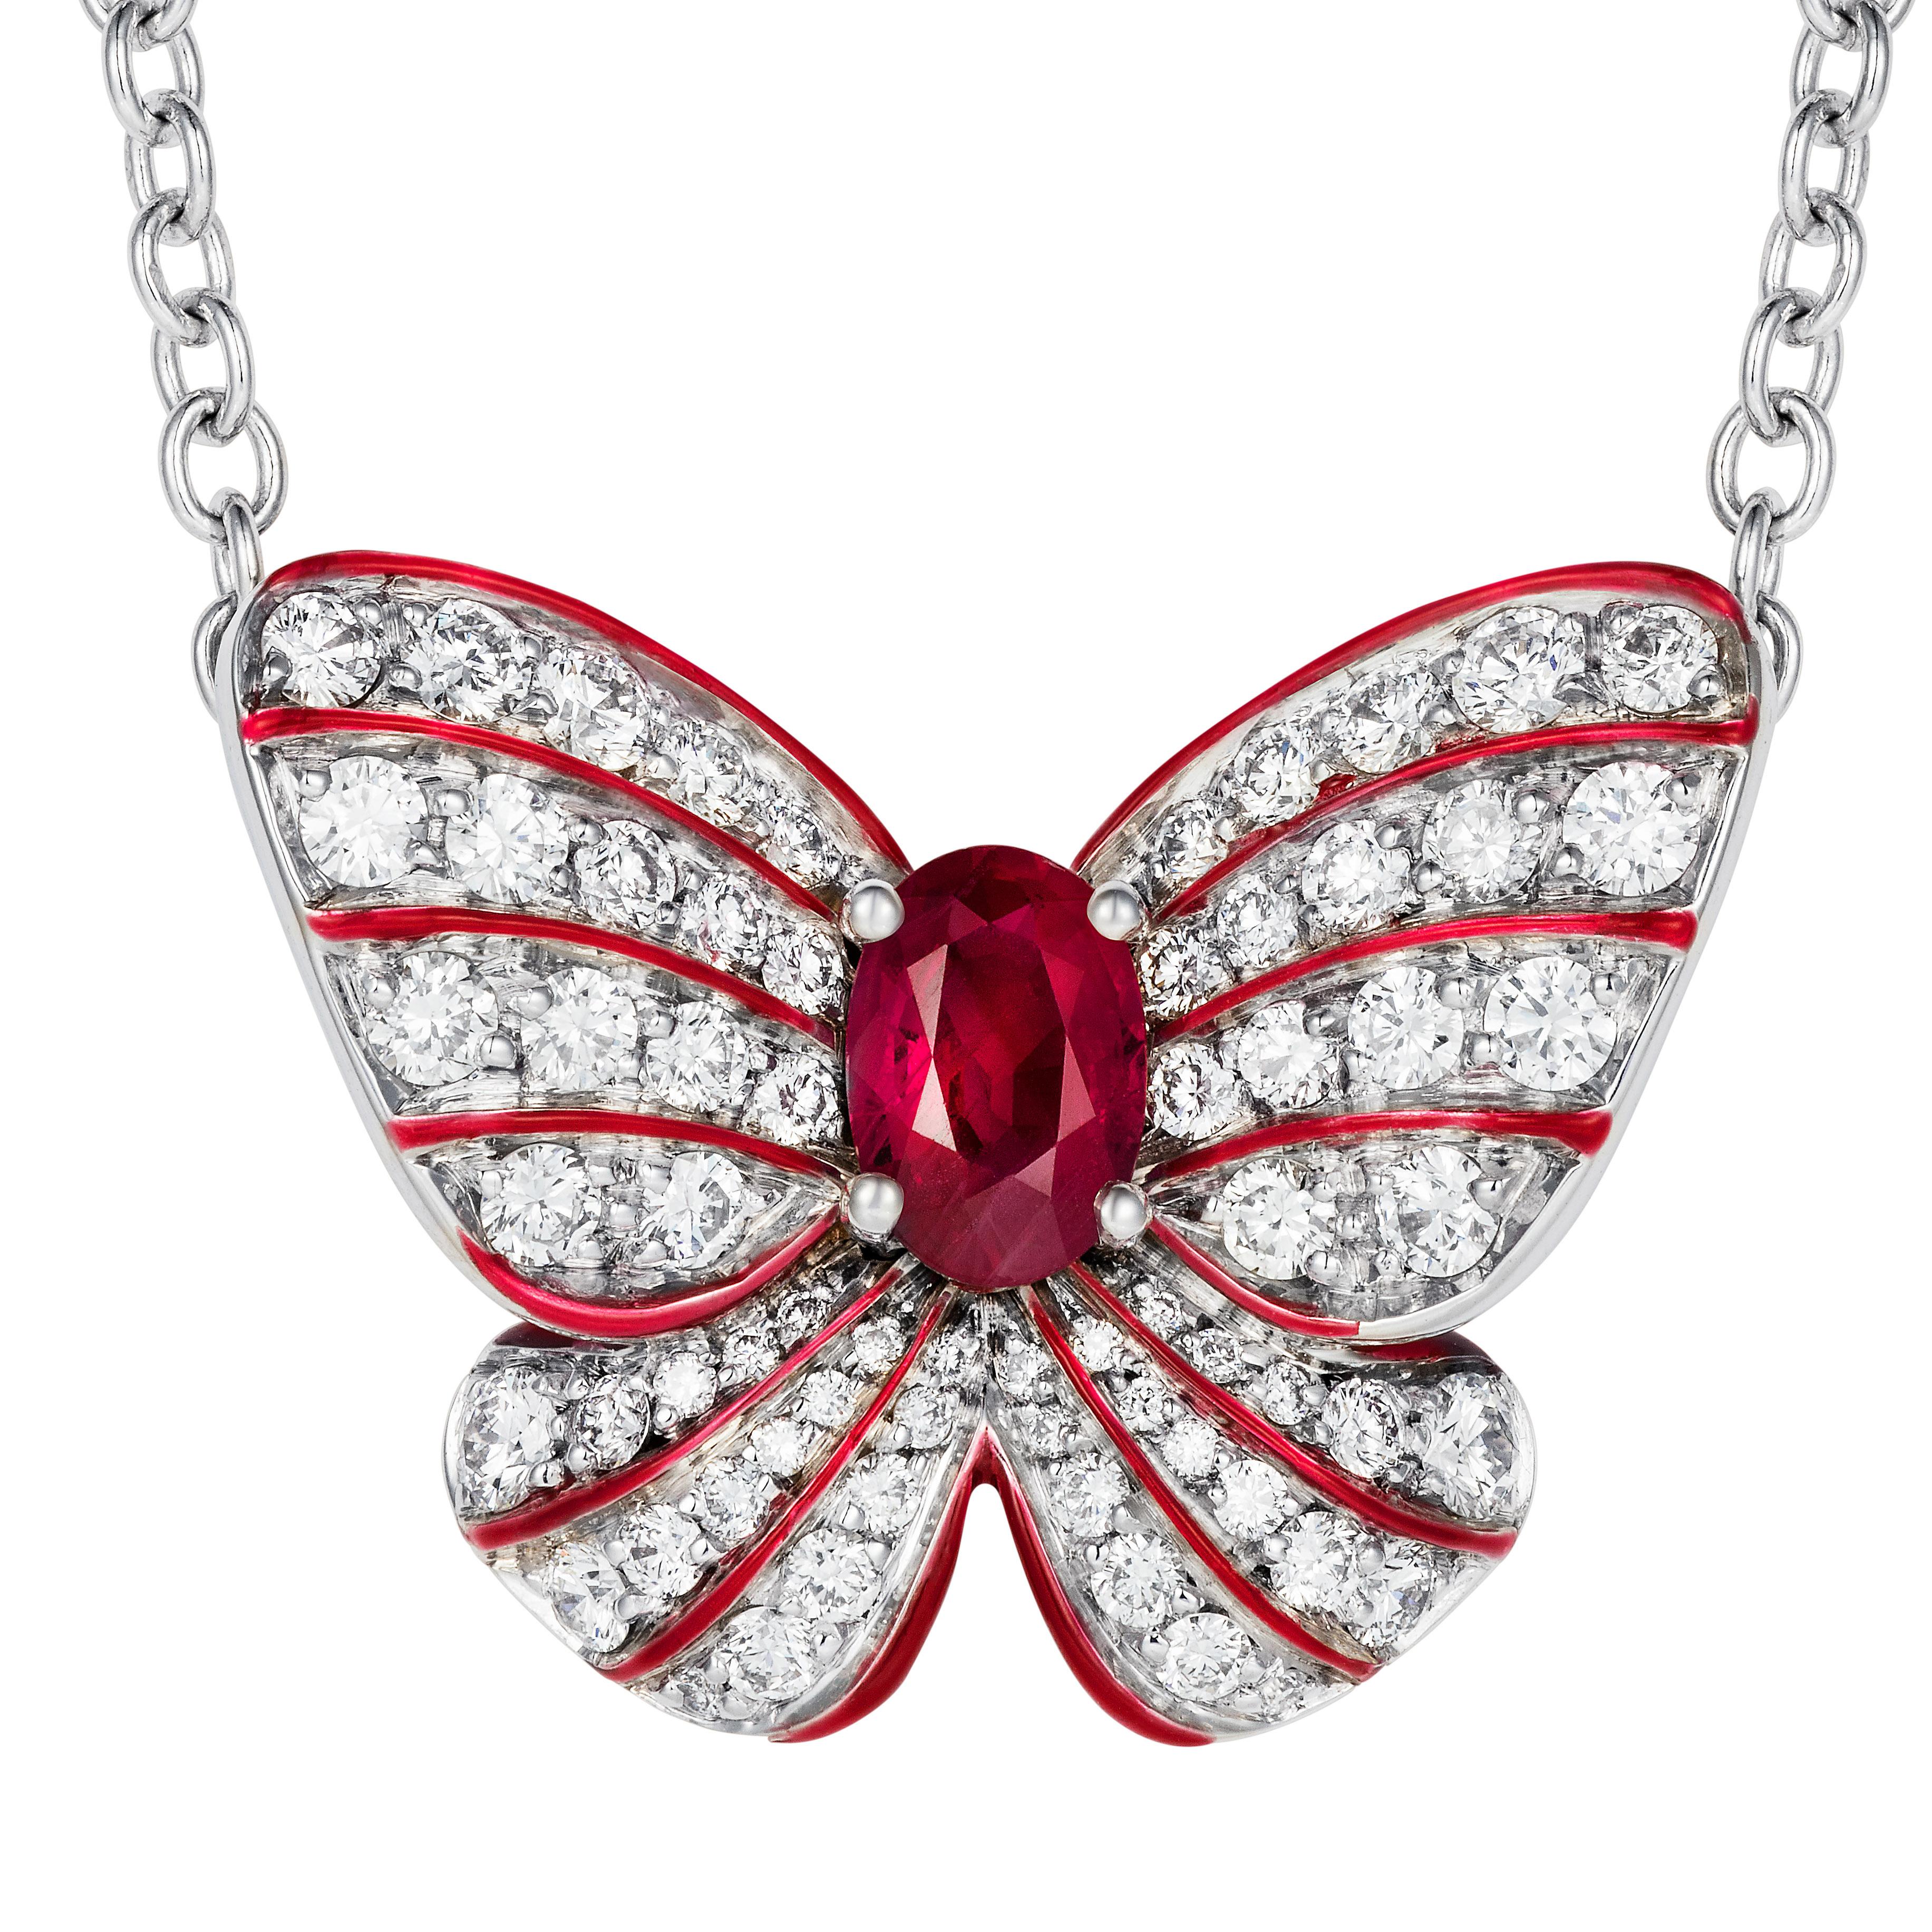 A beautiful ruby is set in the heart of a stylised butterfly pendant set with round diamonds with fine red enamel accents.

- 0.50 carat oval shape ruby
- 66 white diamonds totalling 0.73 carats
- Created in 18K white gold, handmade in